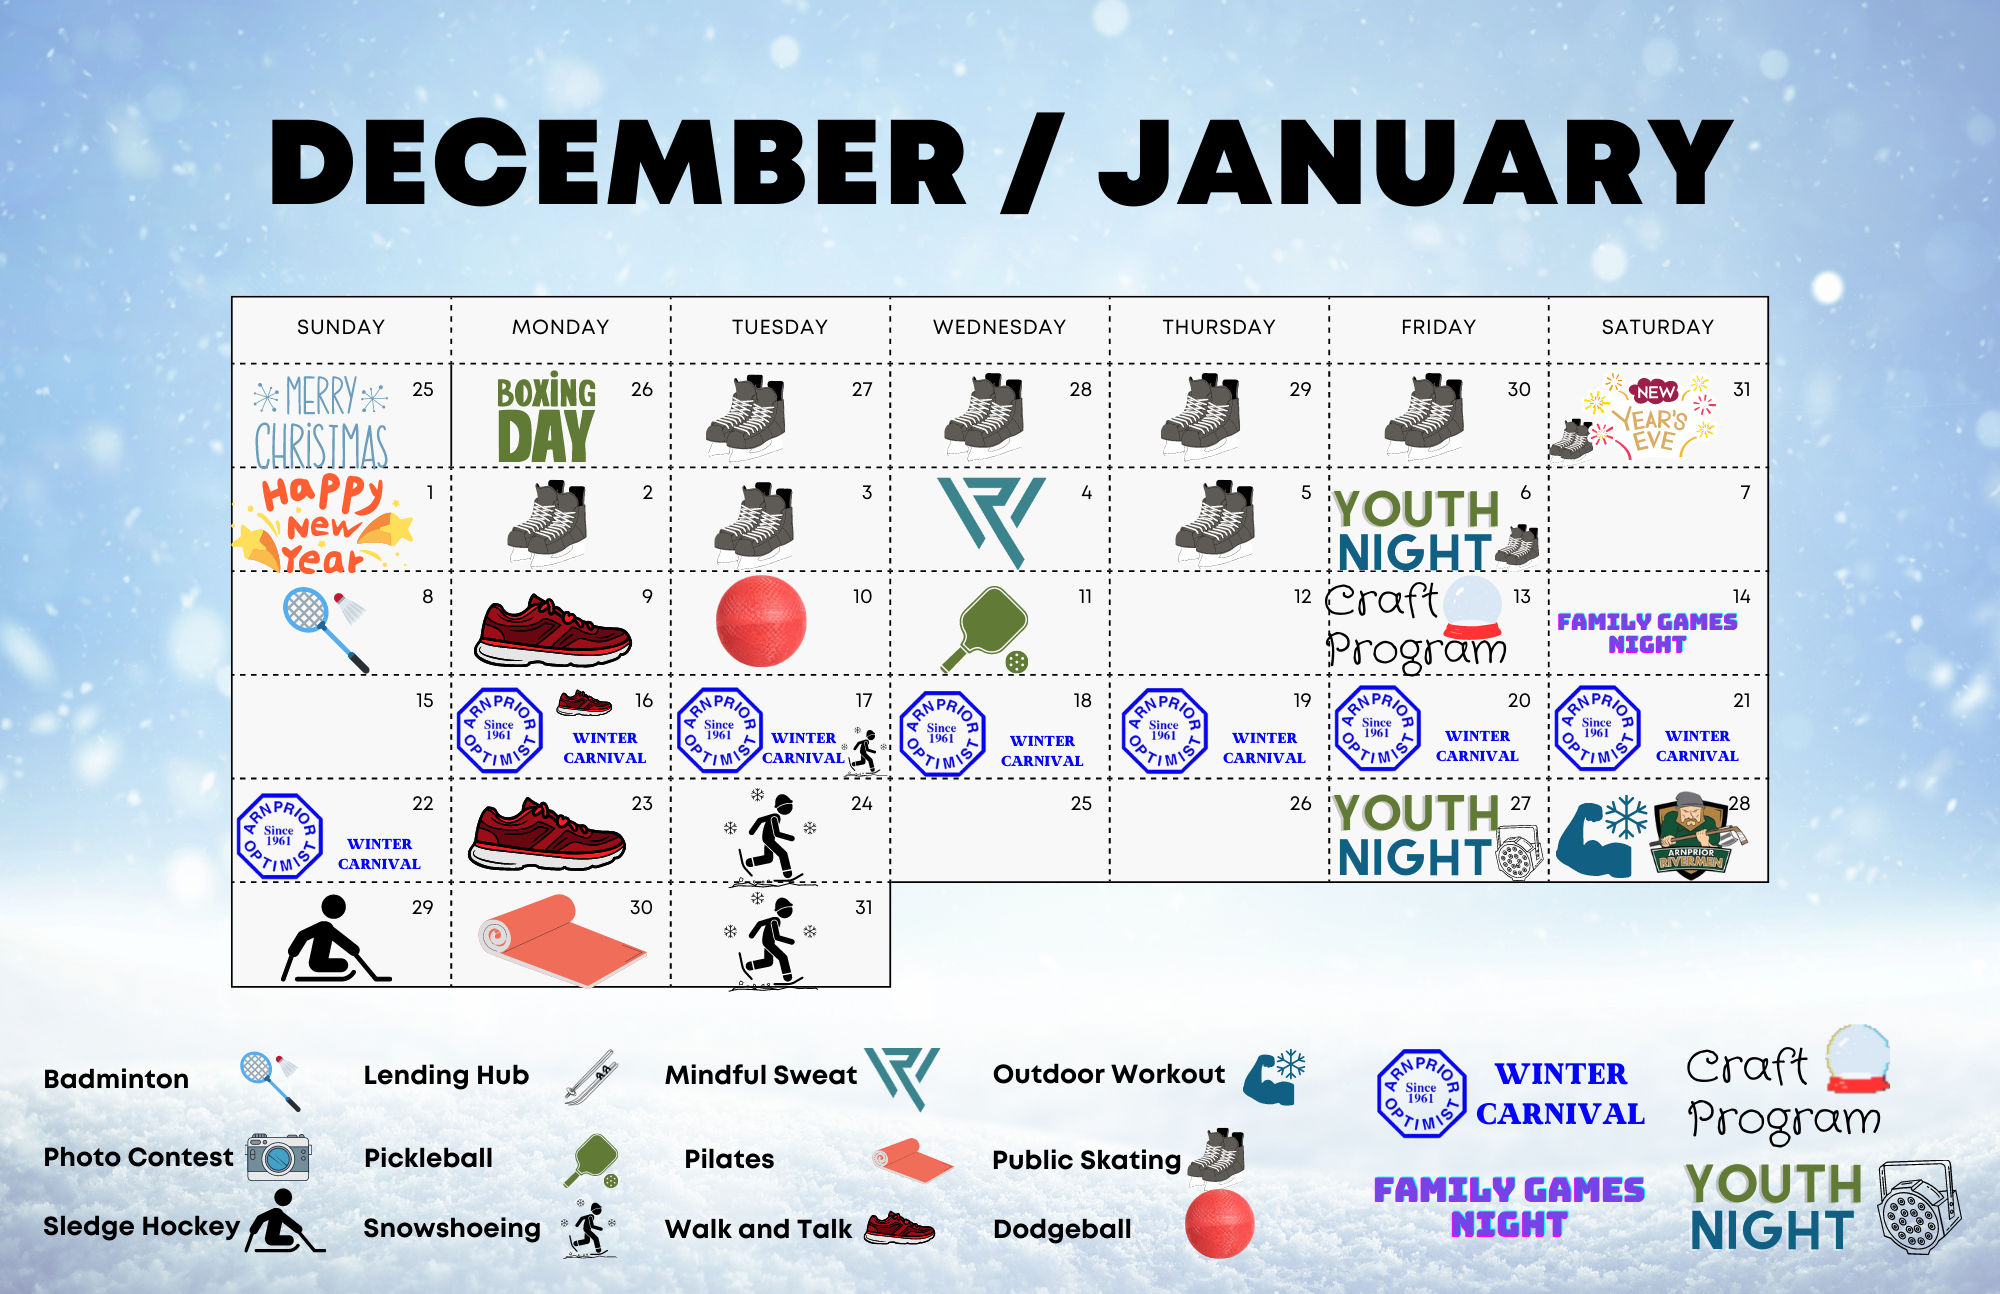 Wintermission schedule for December and January